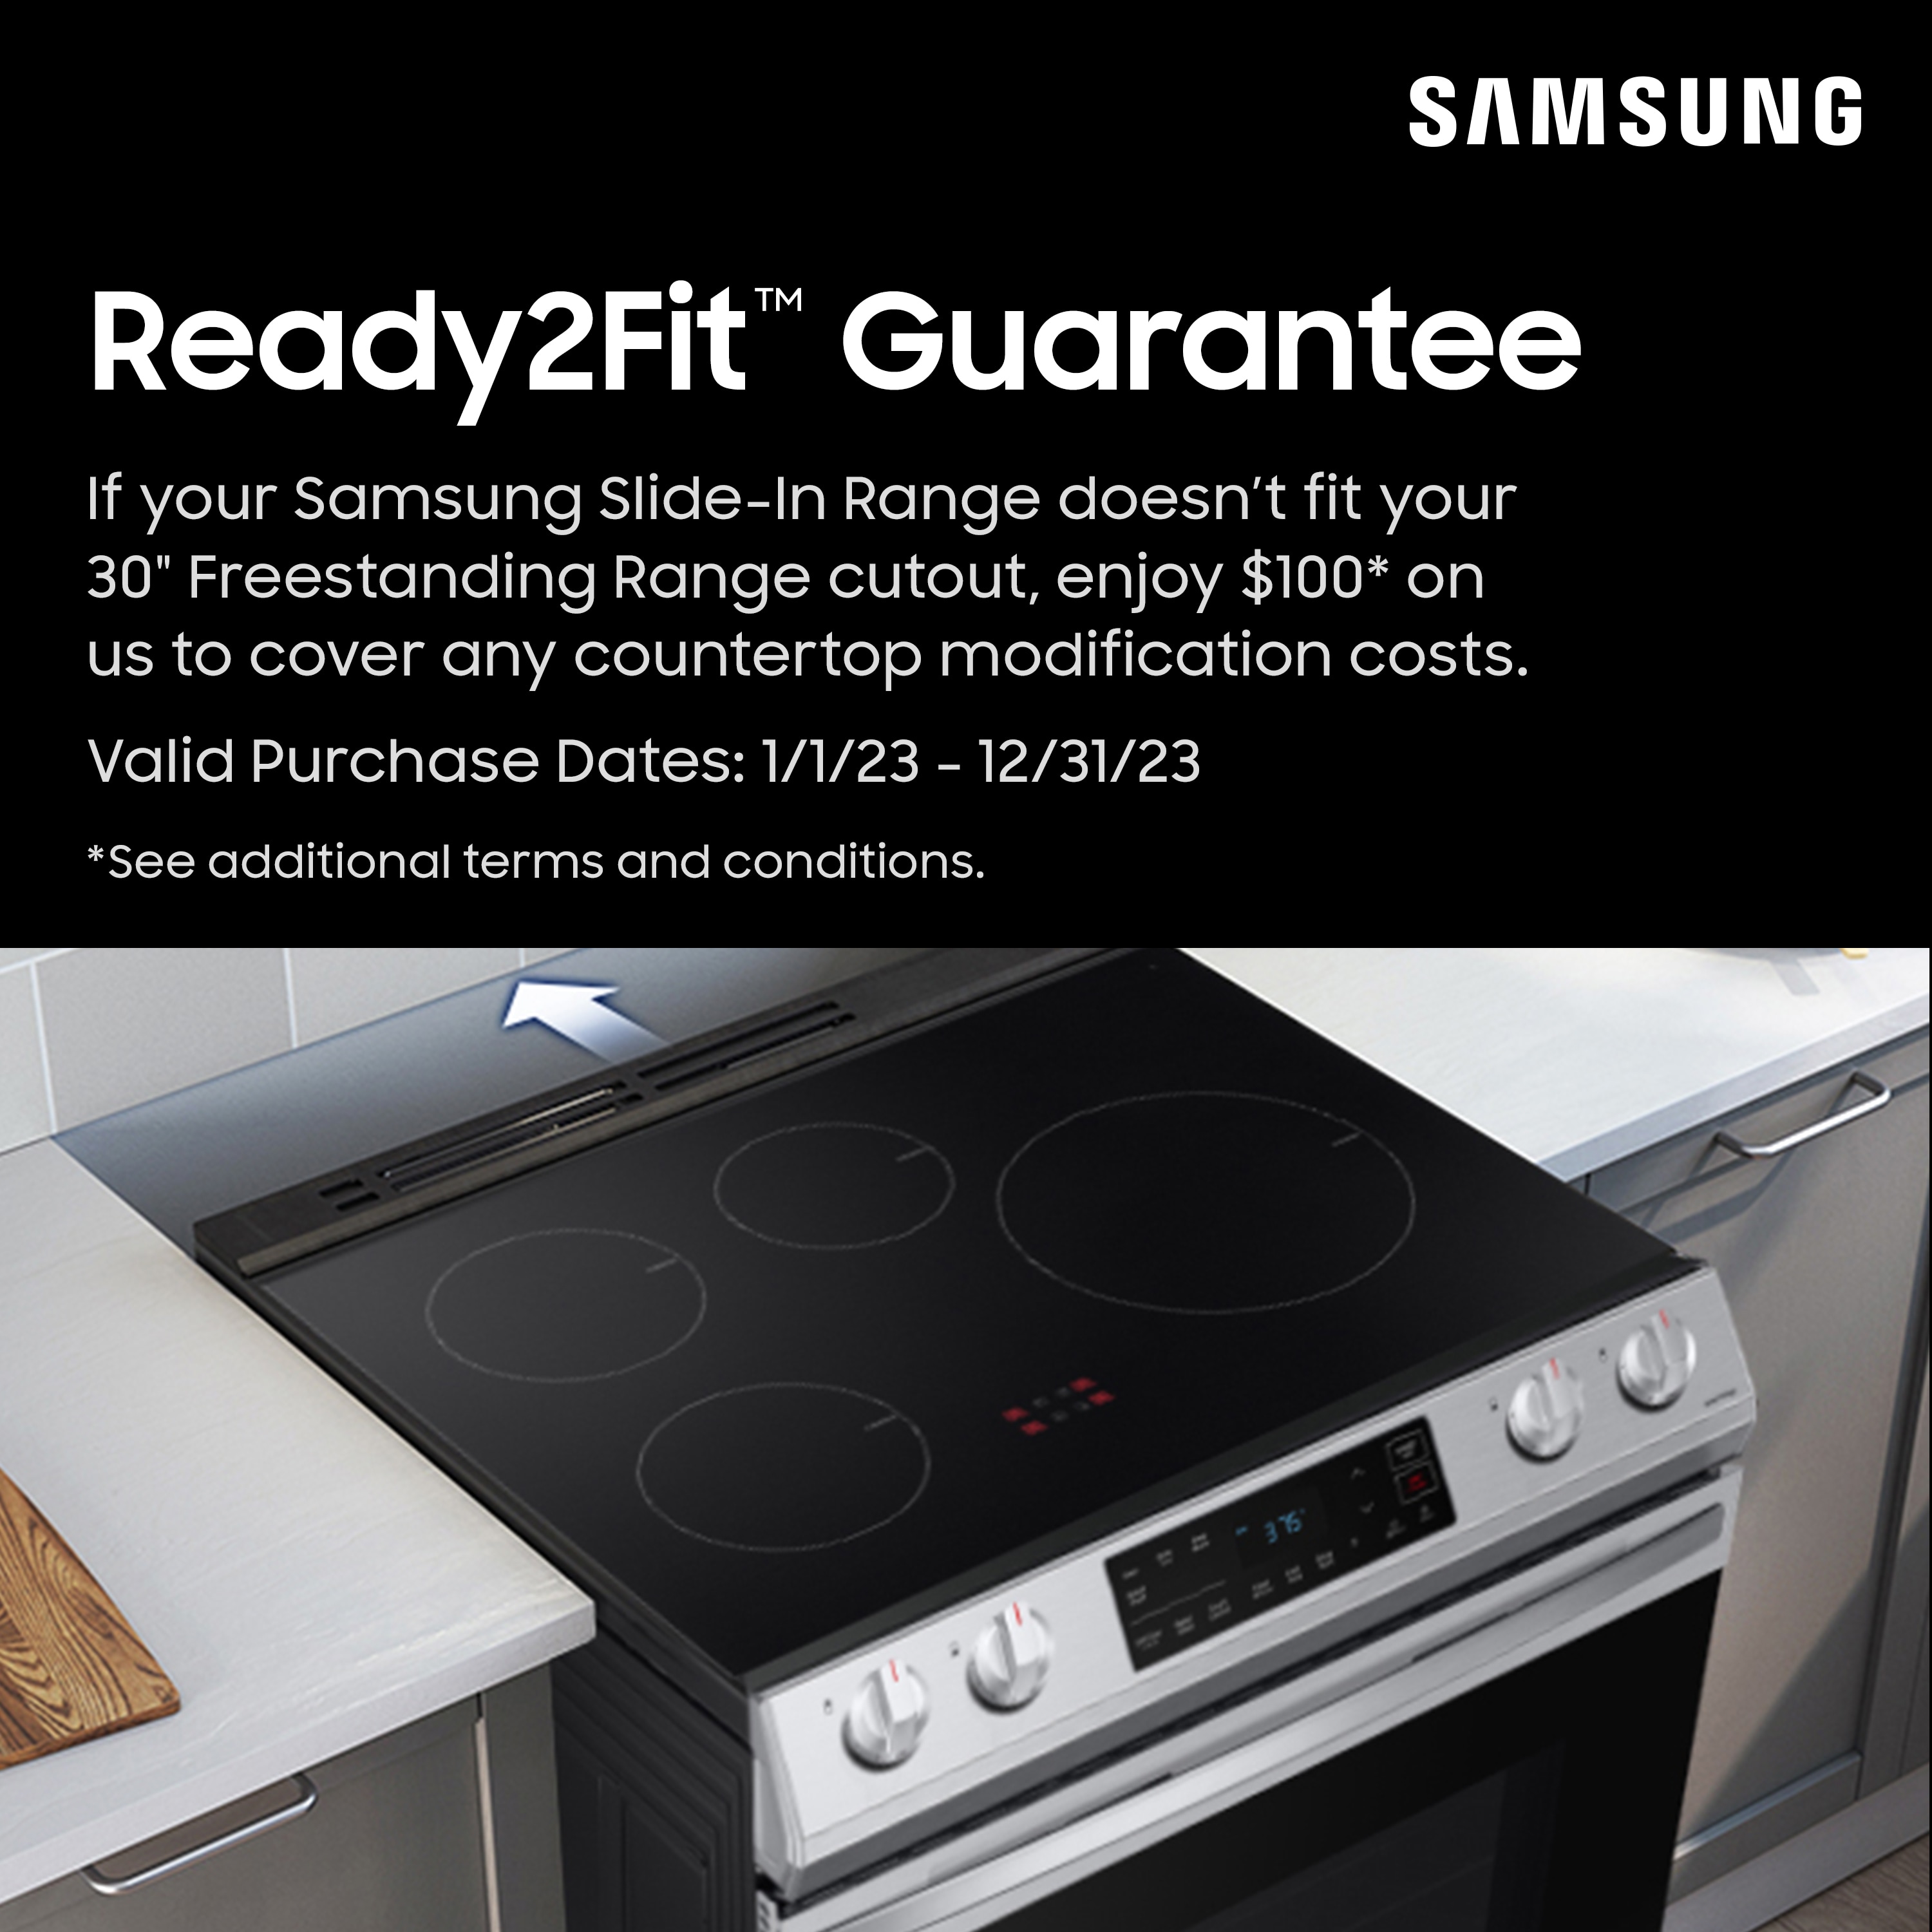 Buy Samsung 6.0 cu. ft. Gas Range with Air Fry - NX60T8511SG